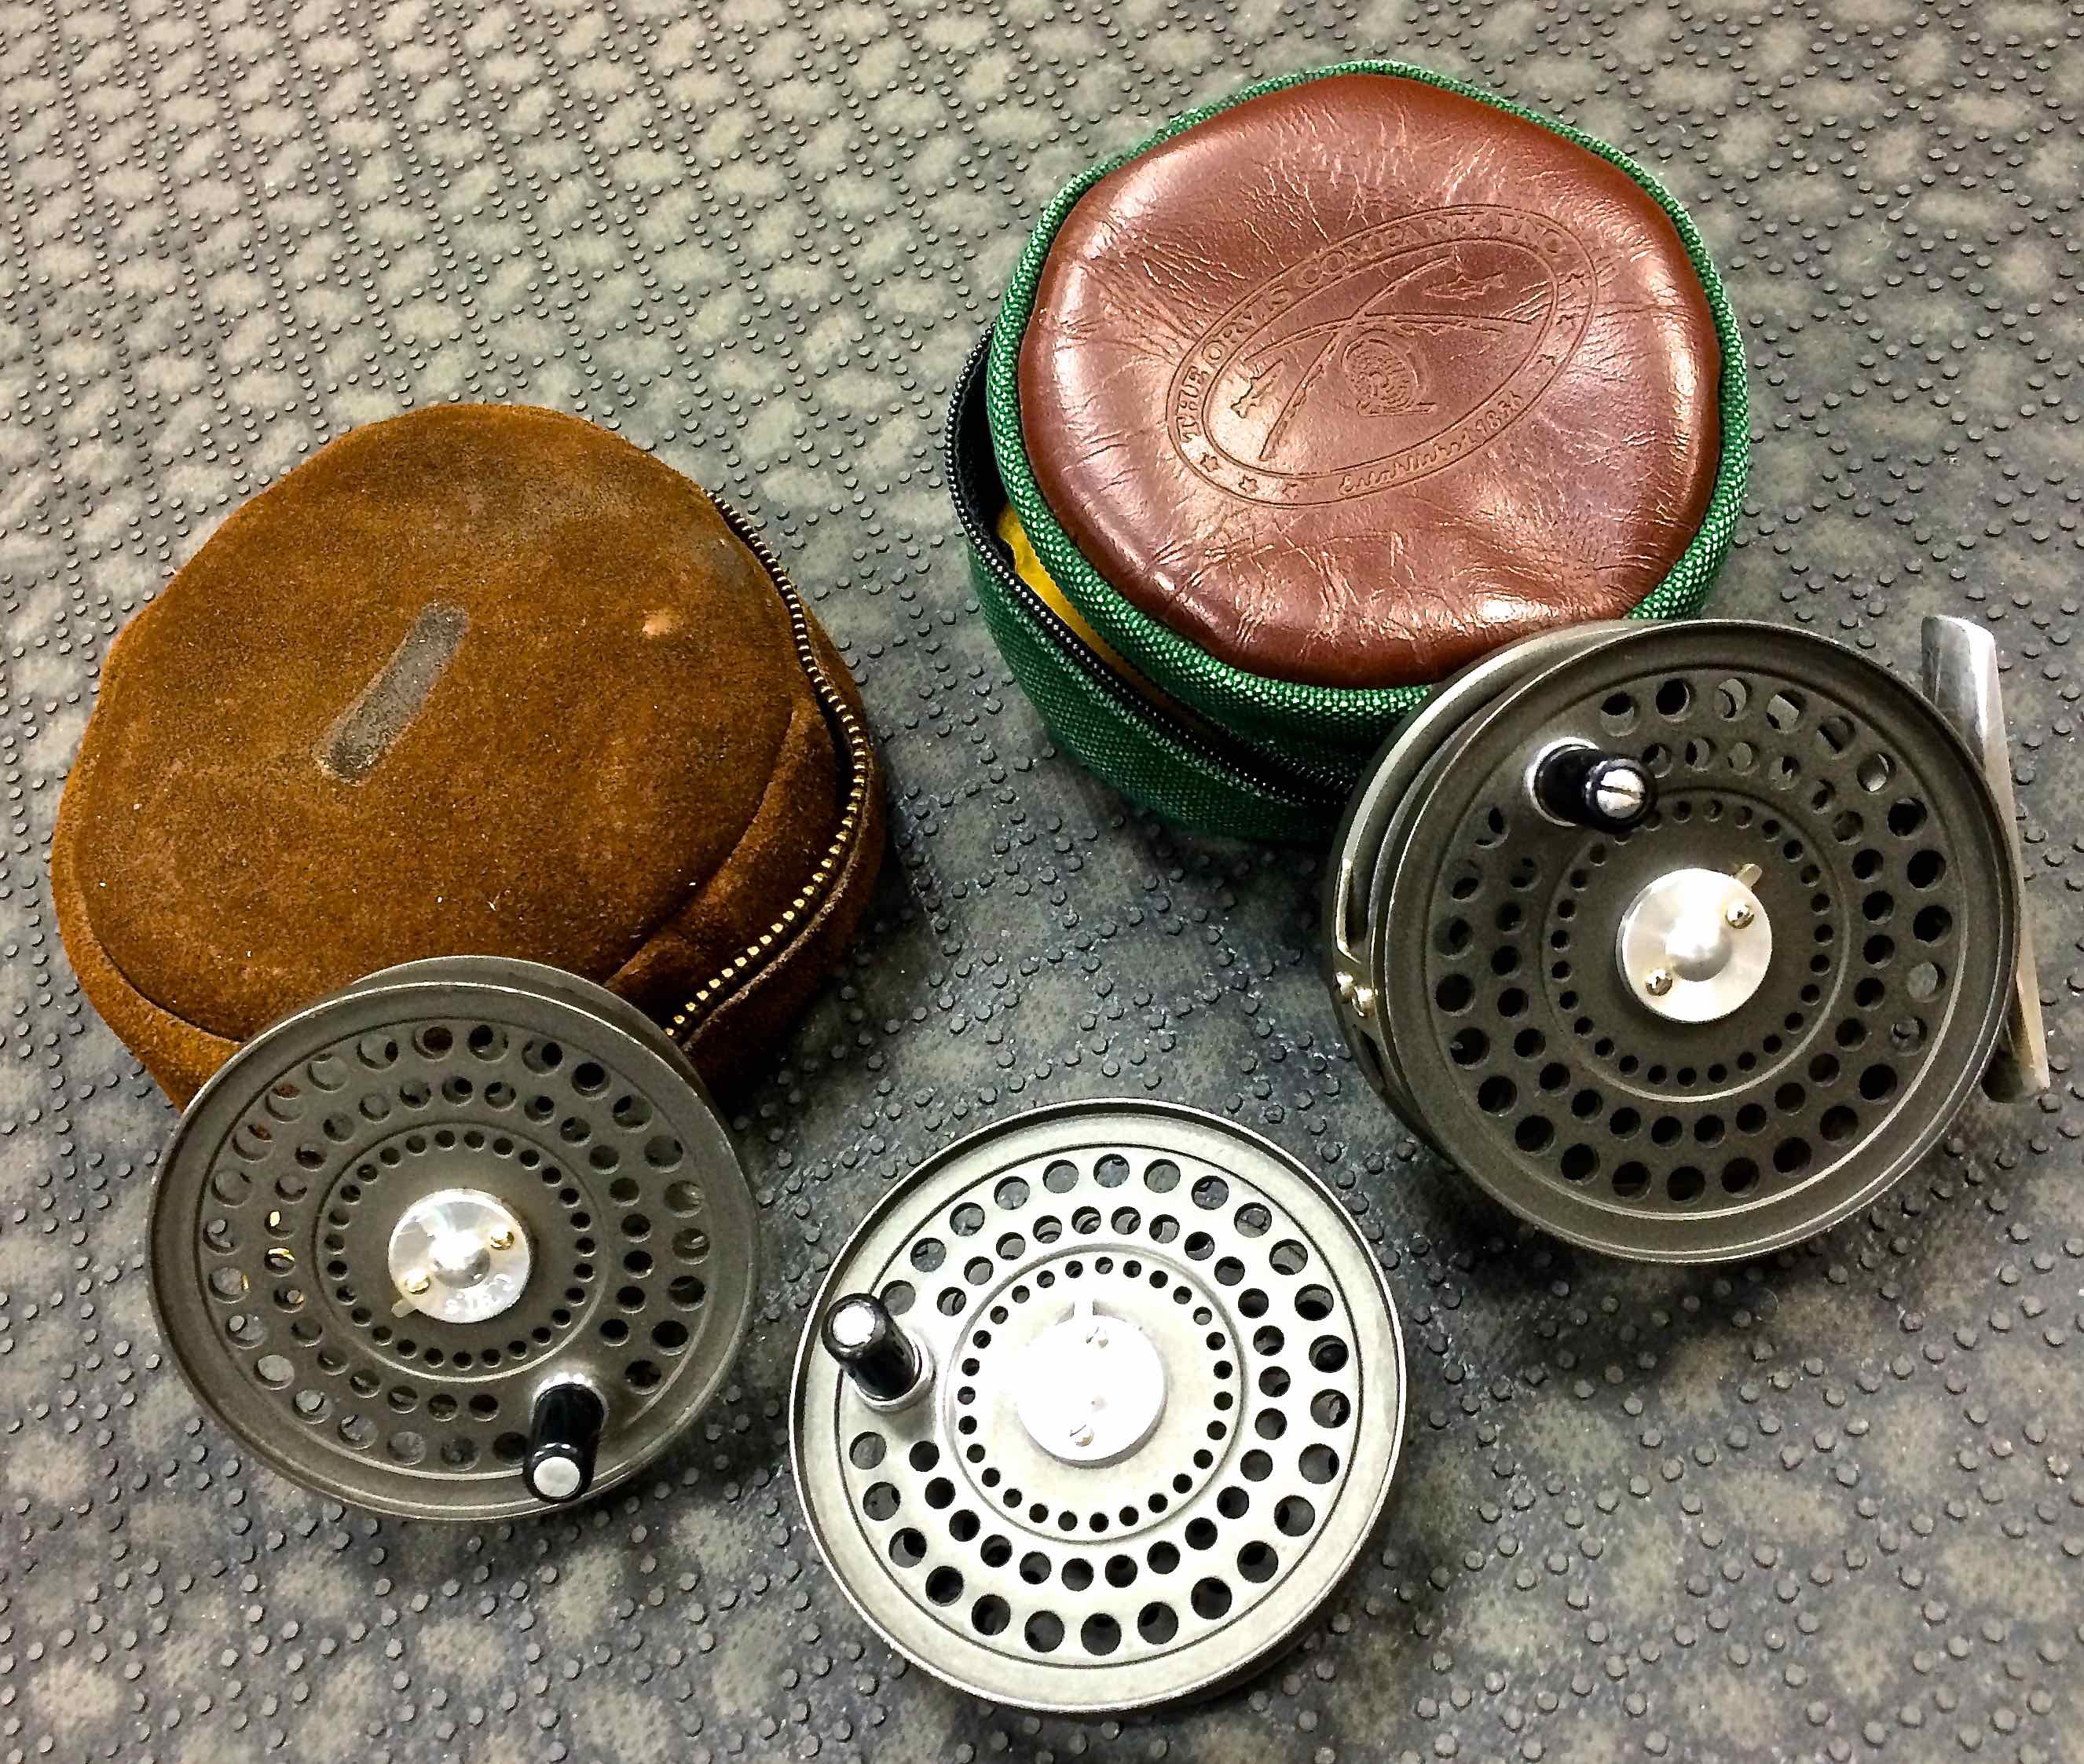 Orvis CFO III Fly Reel – Made in England – C/W 2 Spare Spools